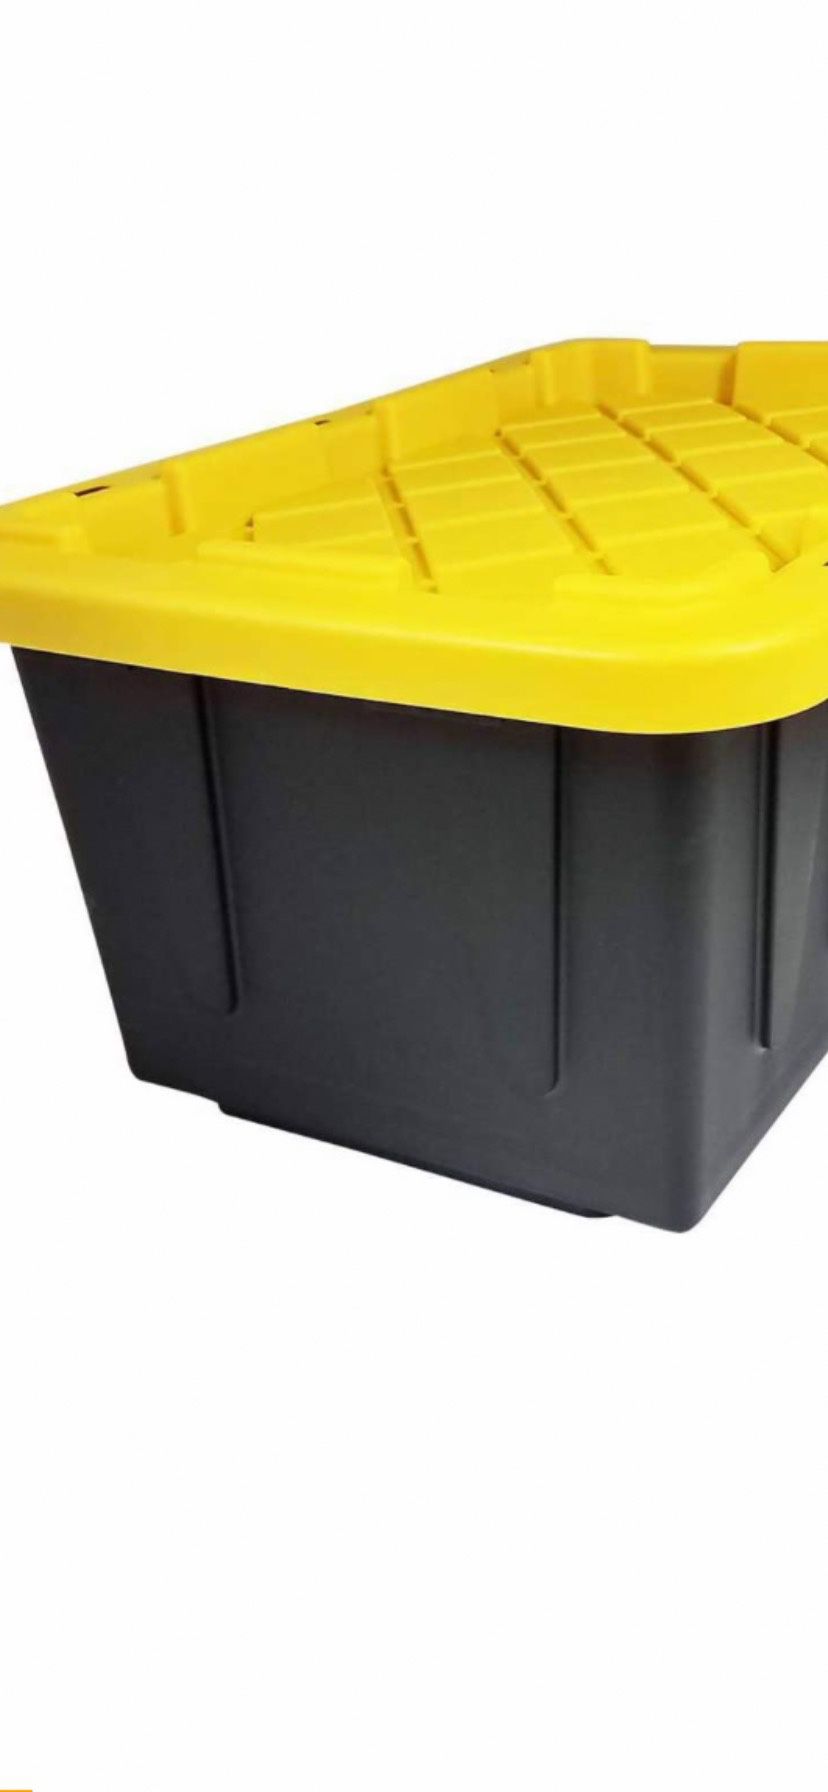 Brand New 27 Super Heavy Duty Storage Containers Asking $15. Each 